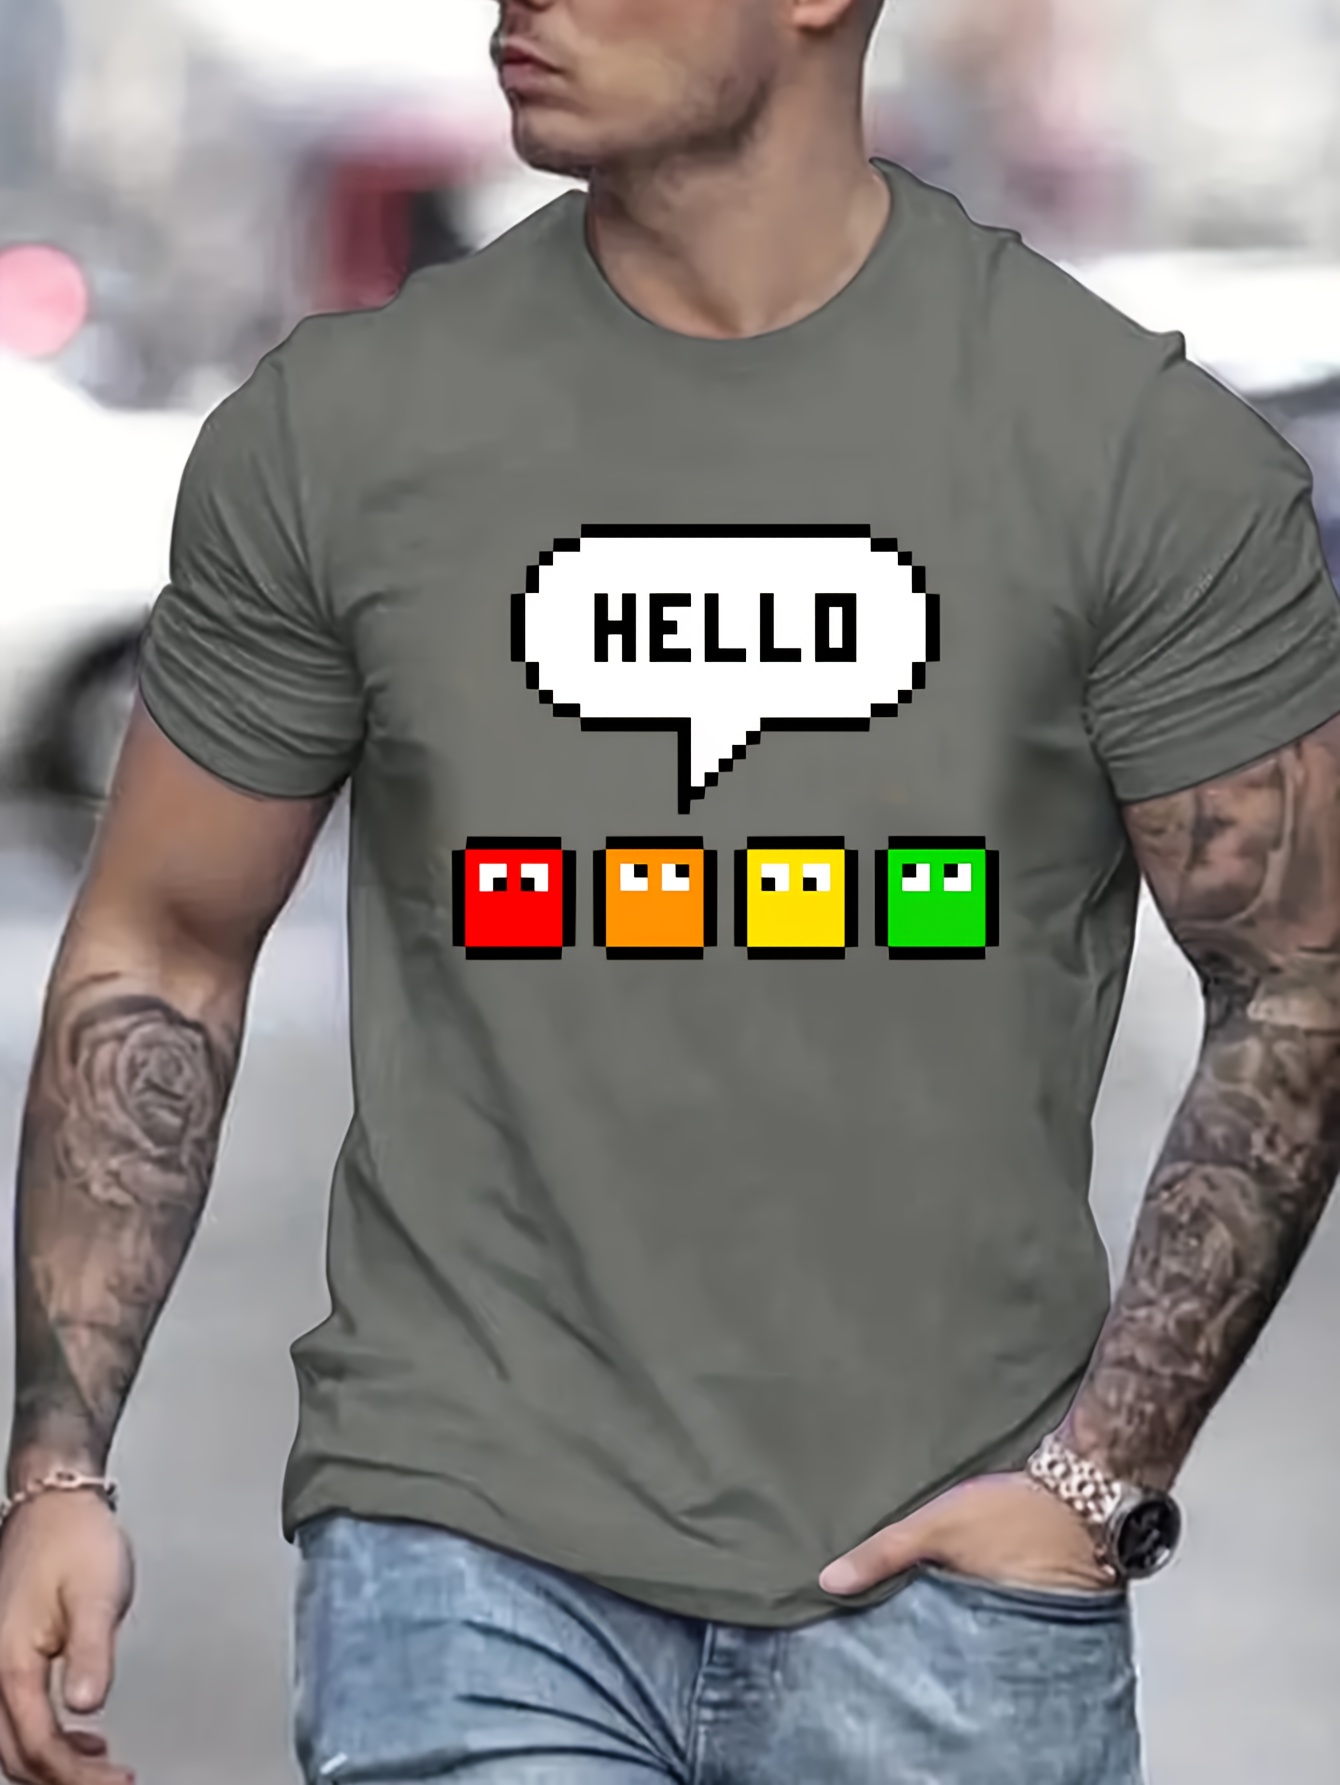 Roblox Characters In Space Kid's Black T-Shirt Short Sleeve